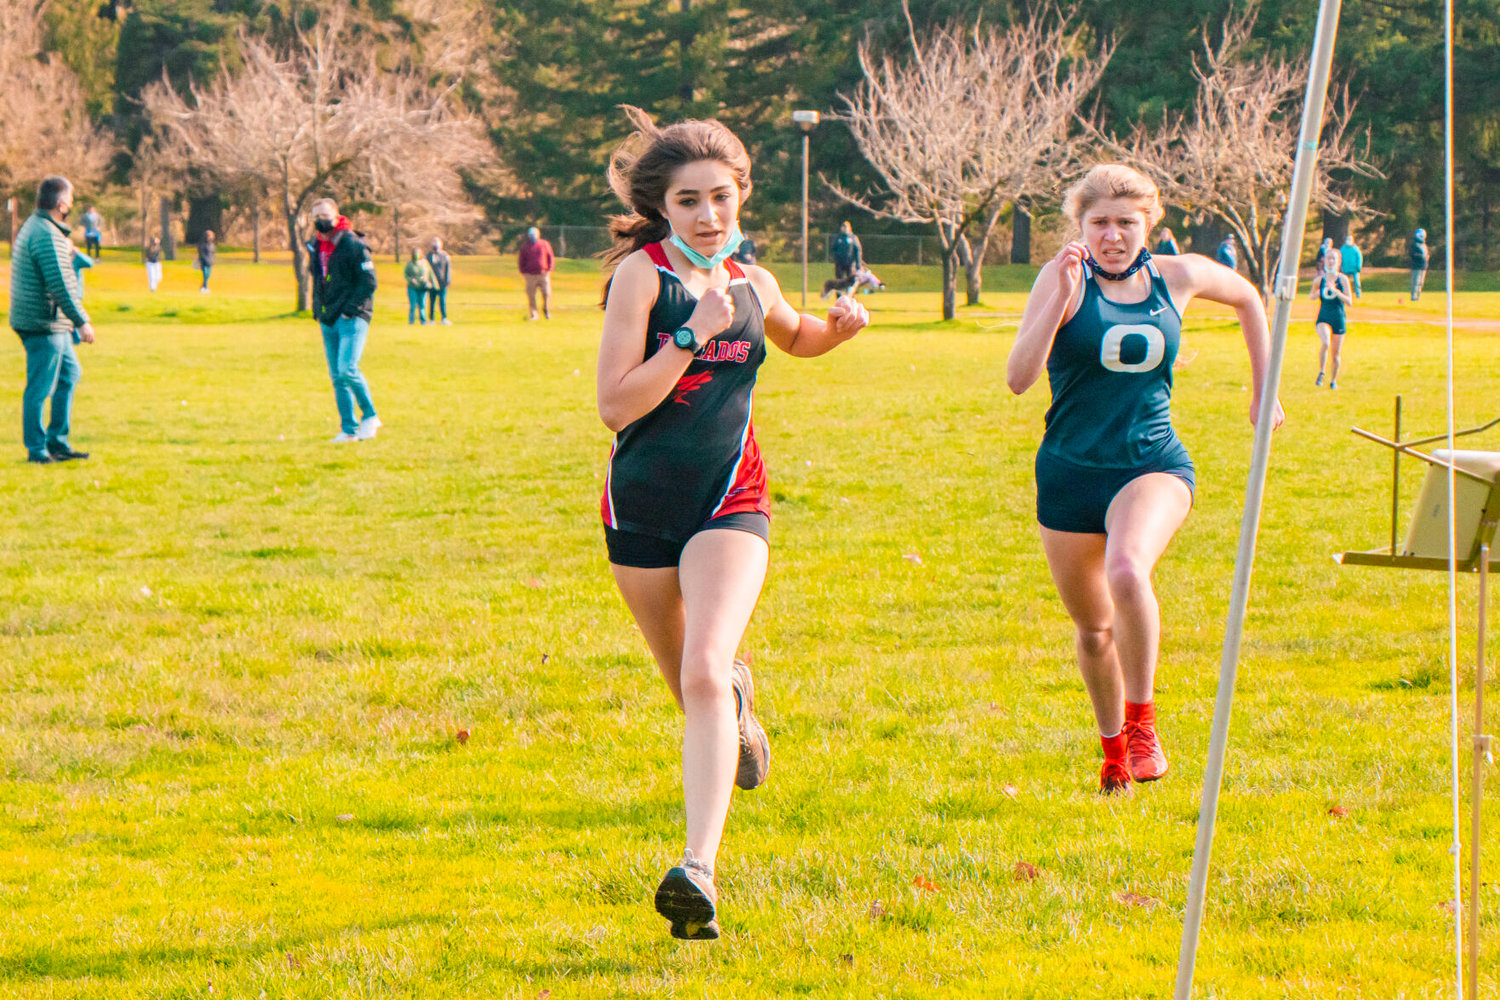 Yelm’s Sophia Laughlin, a freshman, and Olympia’s Elsa Wirth run to the finish line at LBA Park during a cross-country meet in Olympia on Saturday.